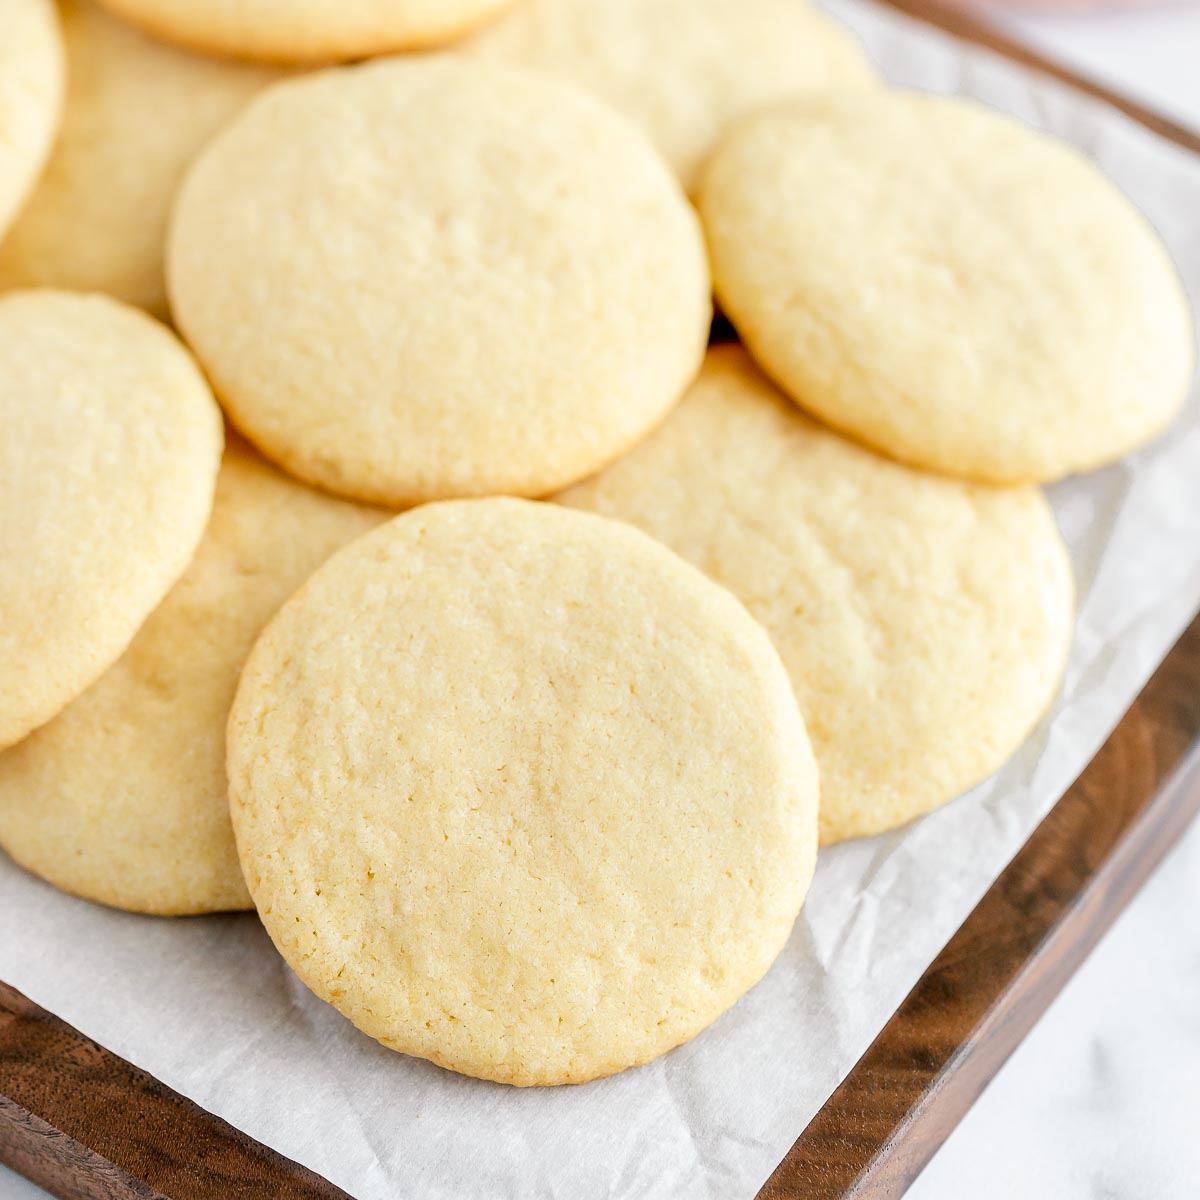 https://www.livewellbakeoften.com/wp-content/uploads/2019/12/Soft-and-Chewy-Sugar-Cookies-7.jpg